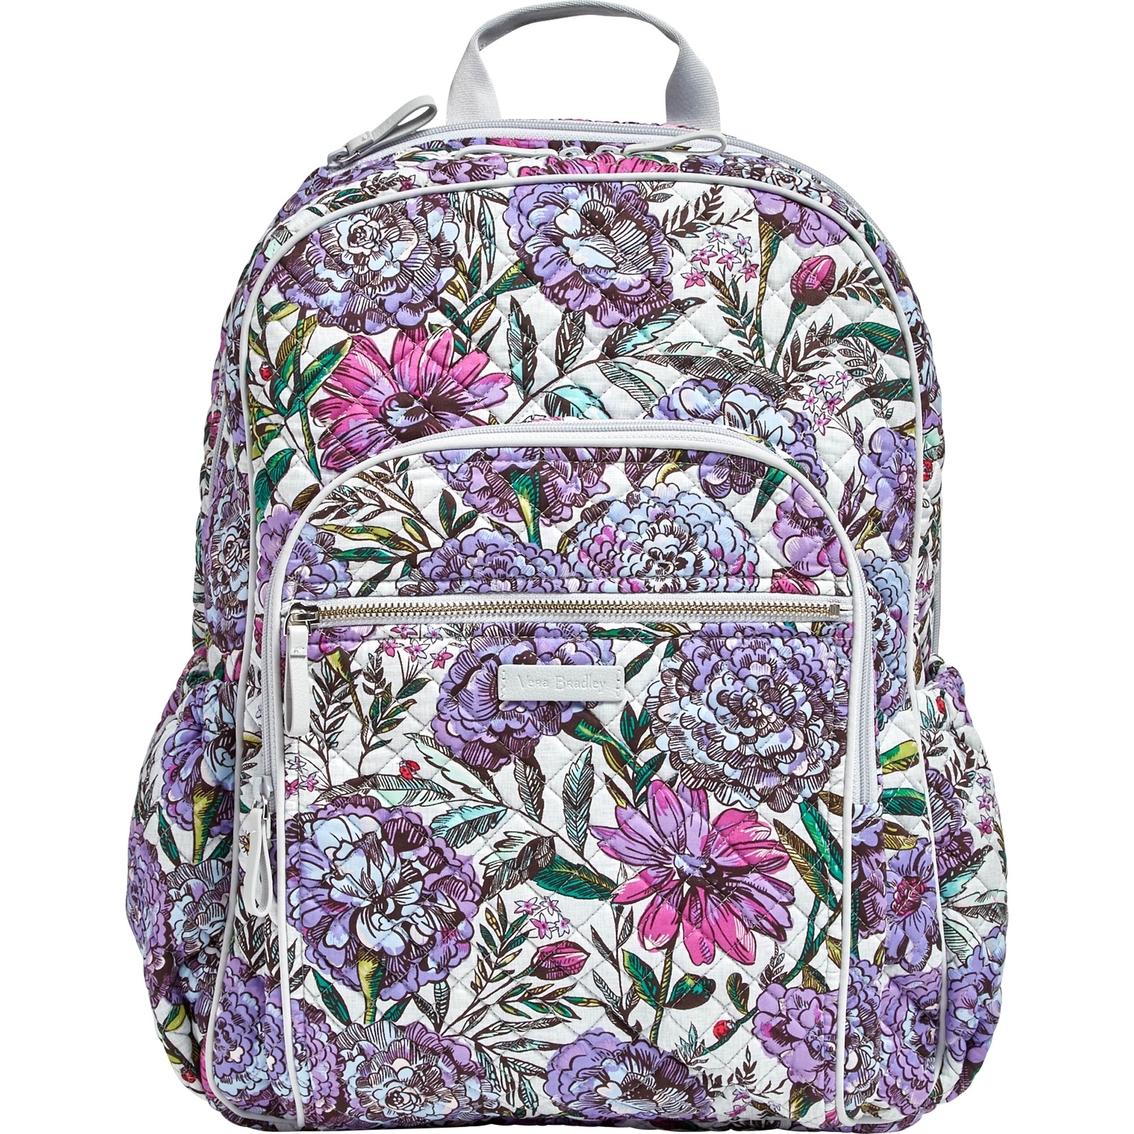 Can You Wash Vera Bradley Backpacks In The Washer Vera Bradley Campus Backpack Signture Cotton Lavender Meadow Backpacks Back To School Shop Shop The Exchange